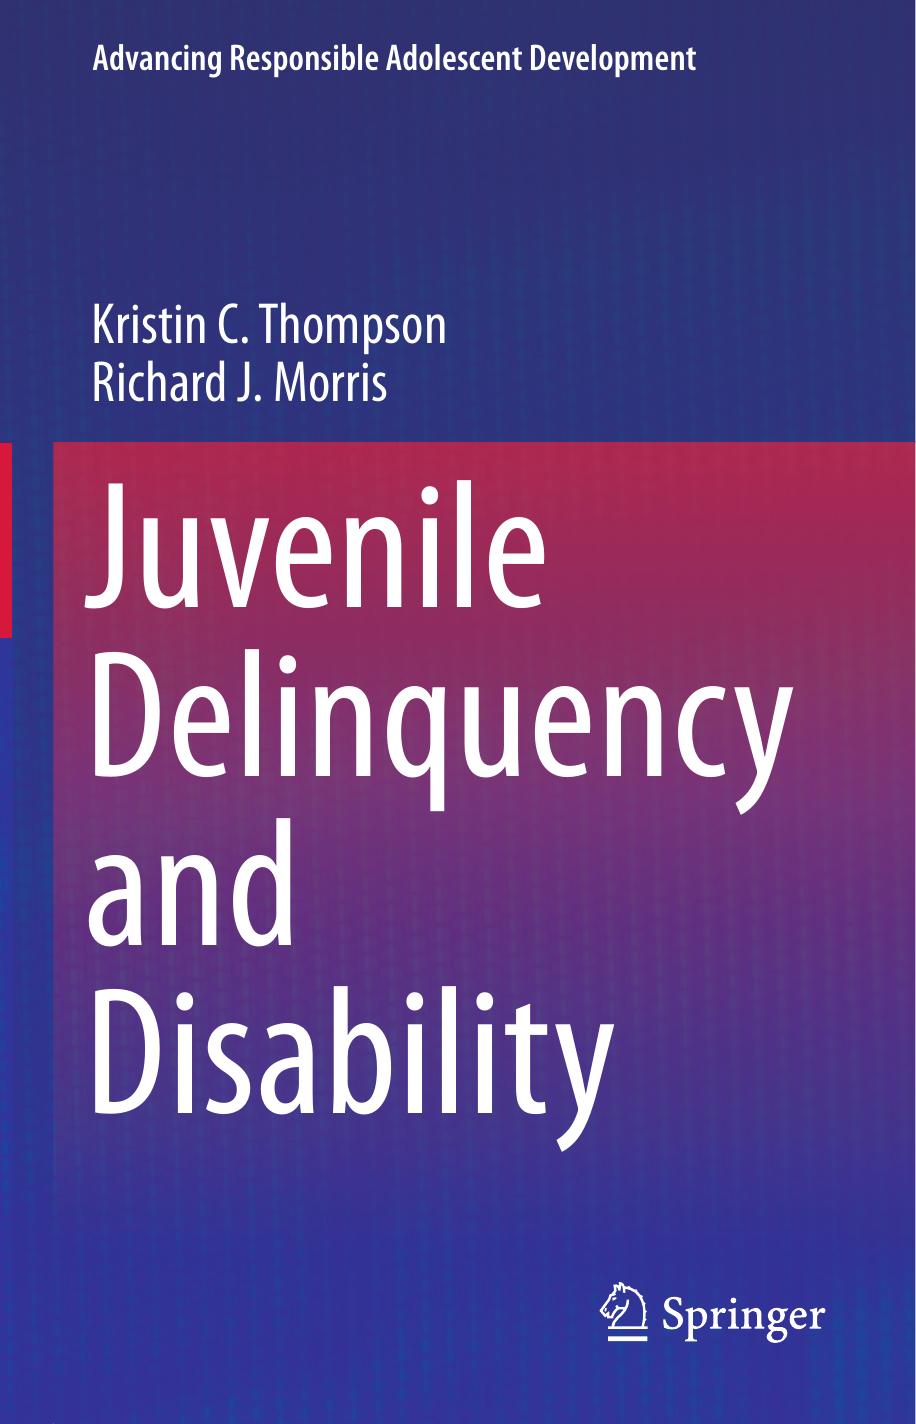 24 Juvenile Delinquency and Disability 2016